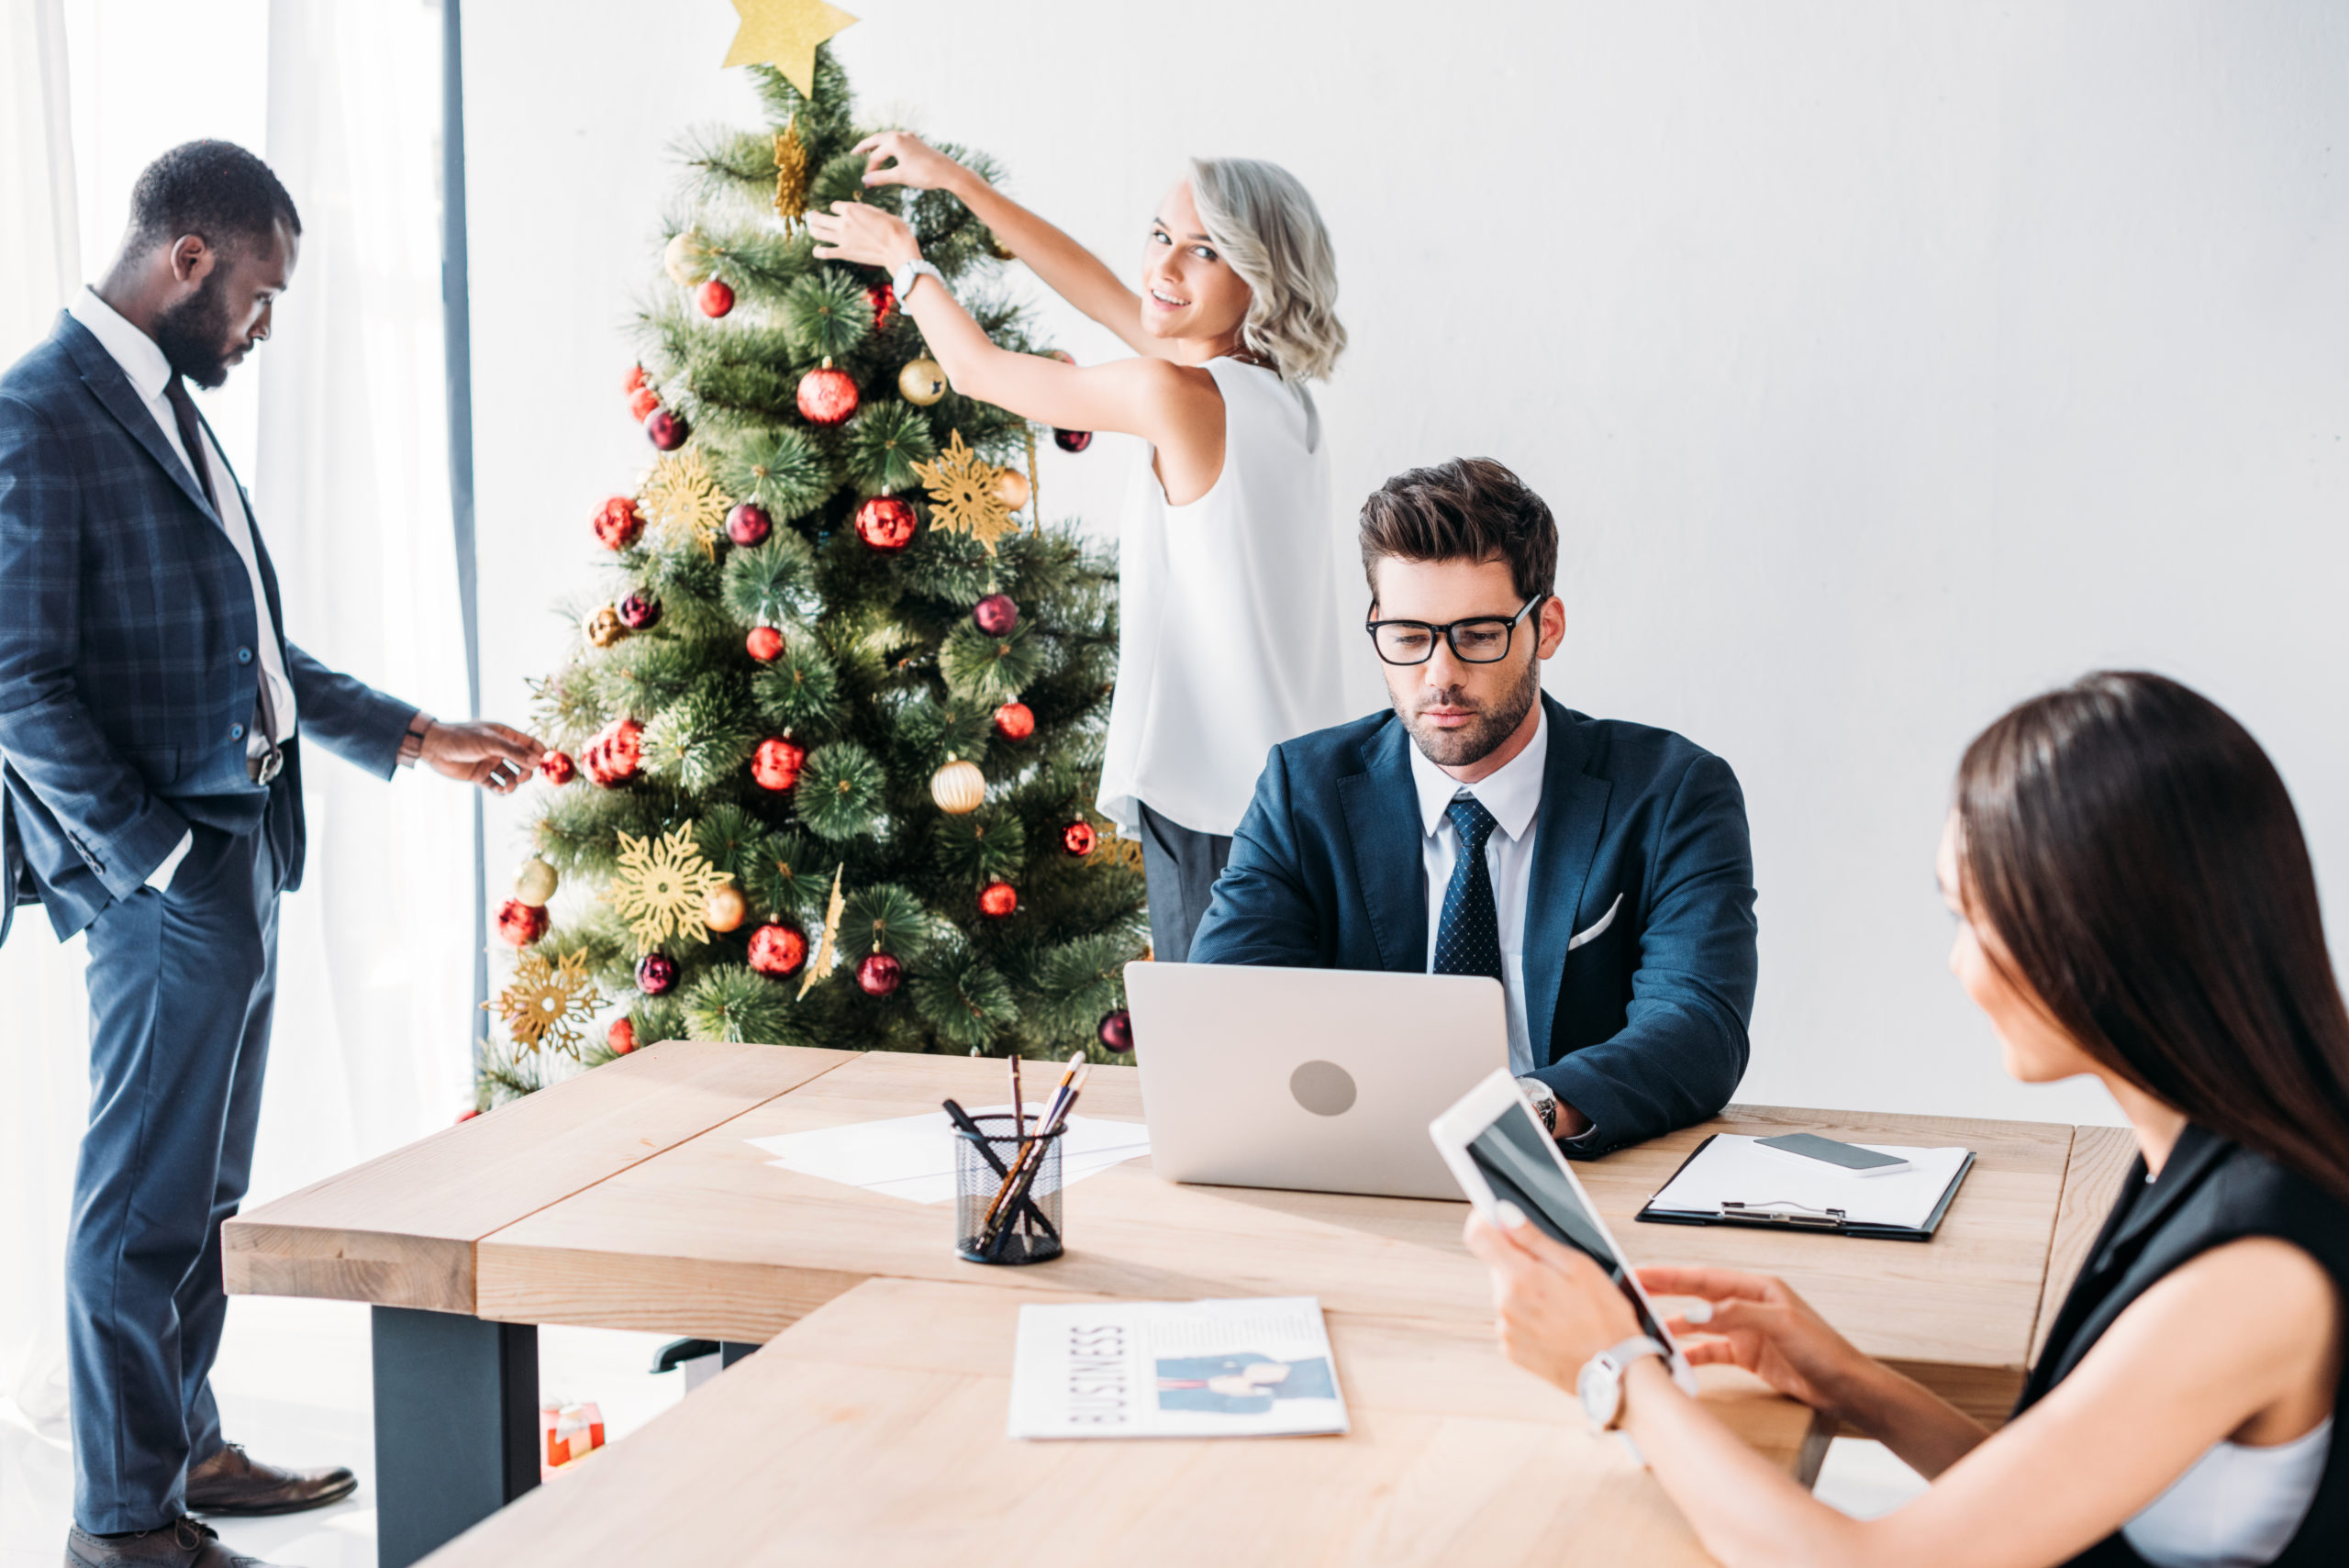 Office decorations that can lead to work holiday party injuries.